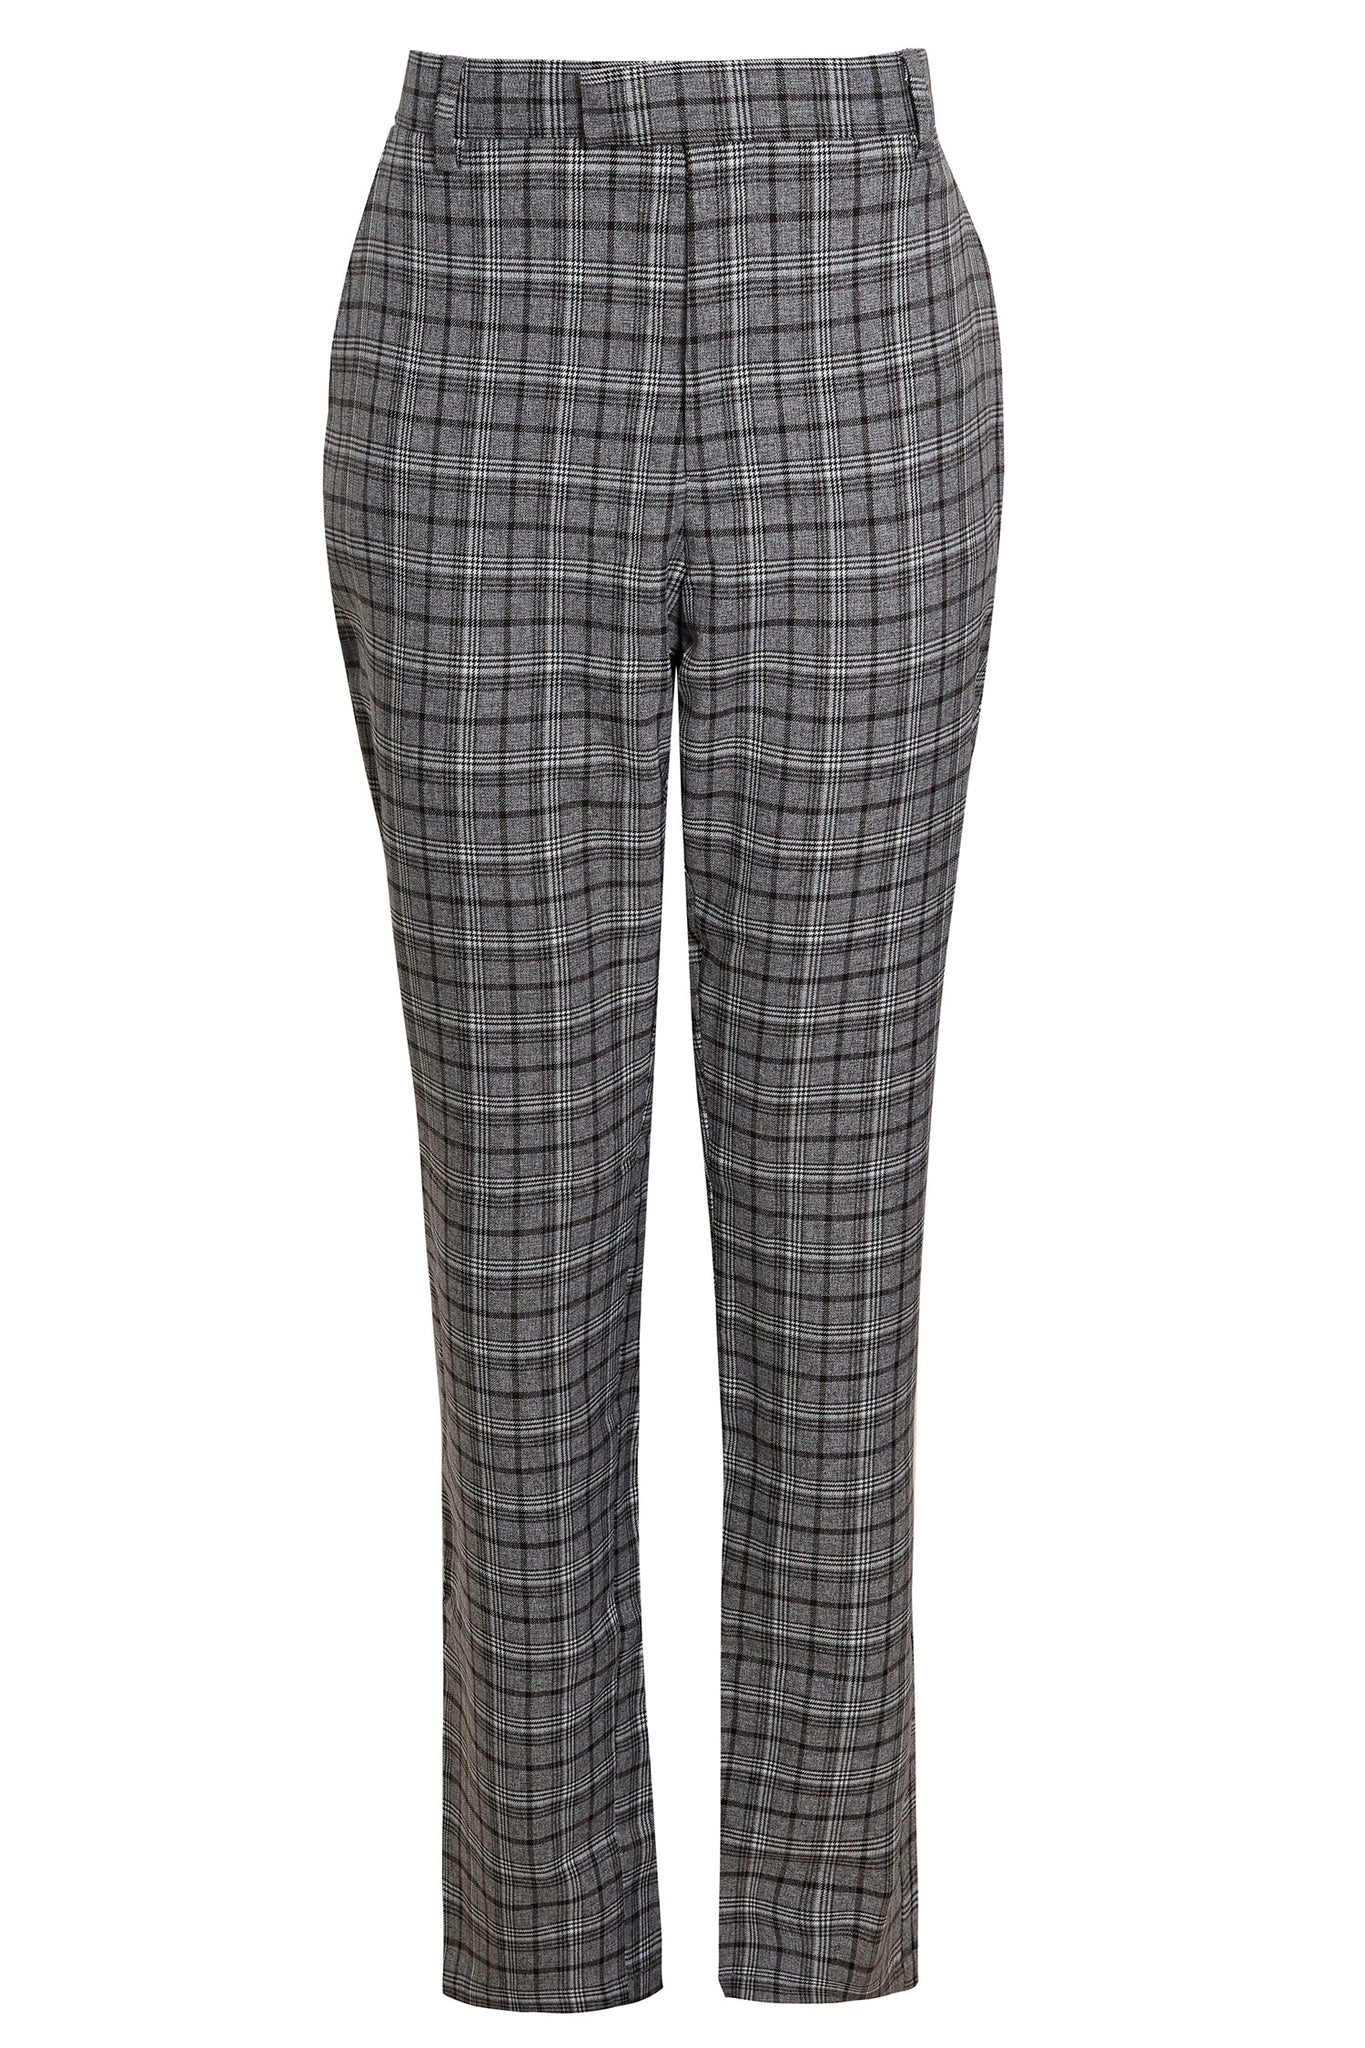 CHECK SLIM FIT TAILORED TROUSER